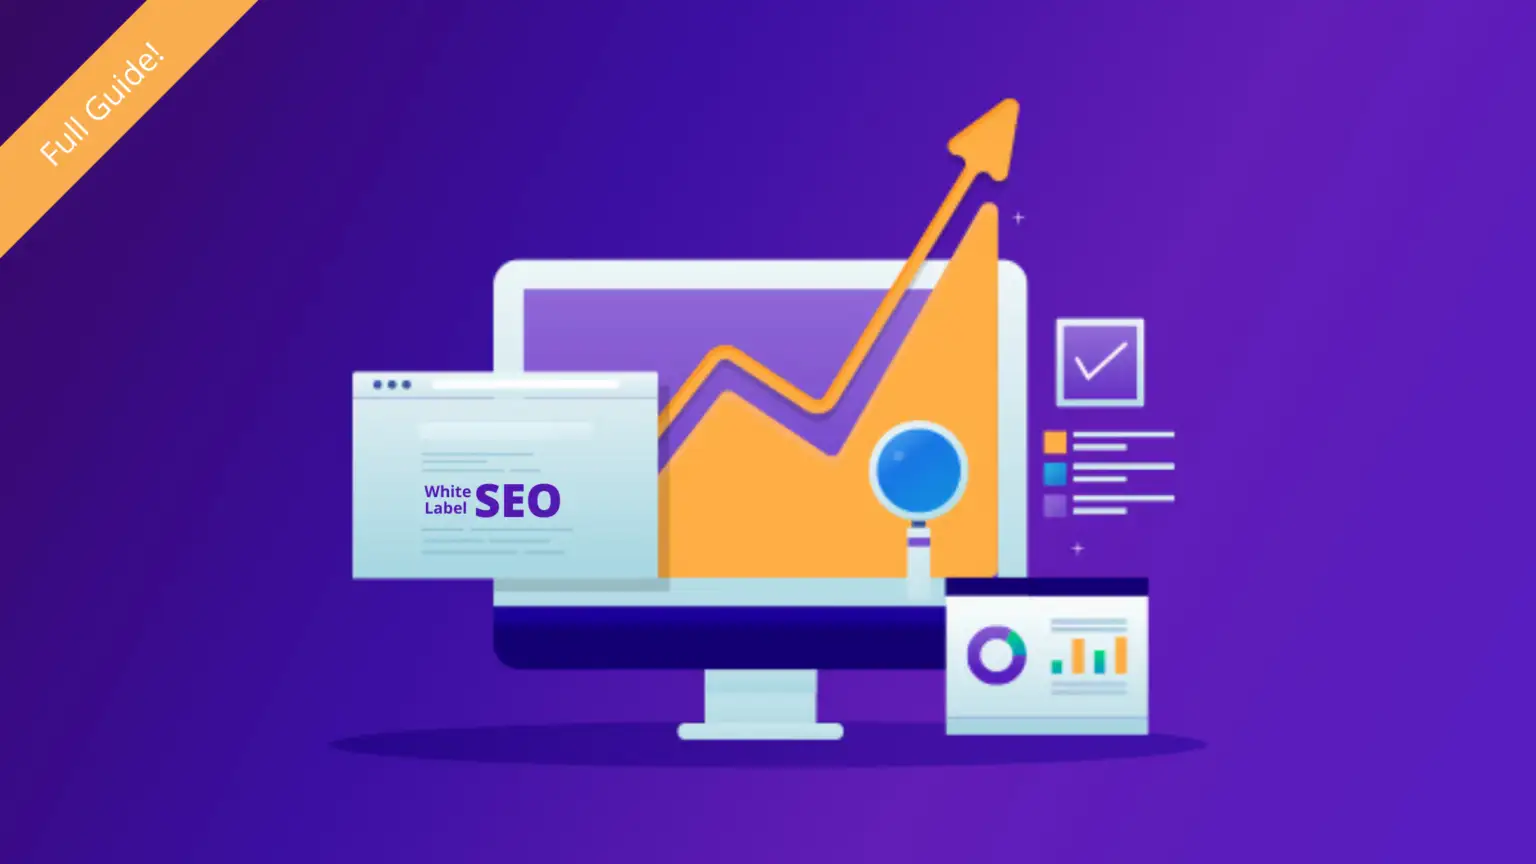 Label SEO Services For Boost Your Business